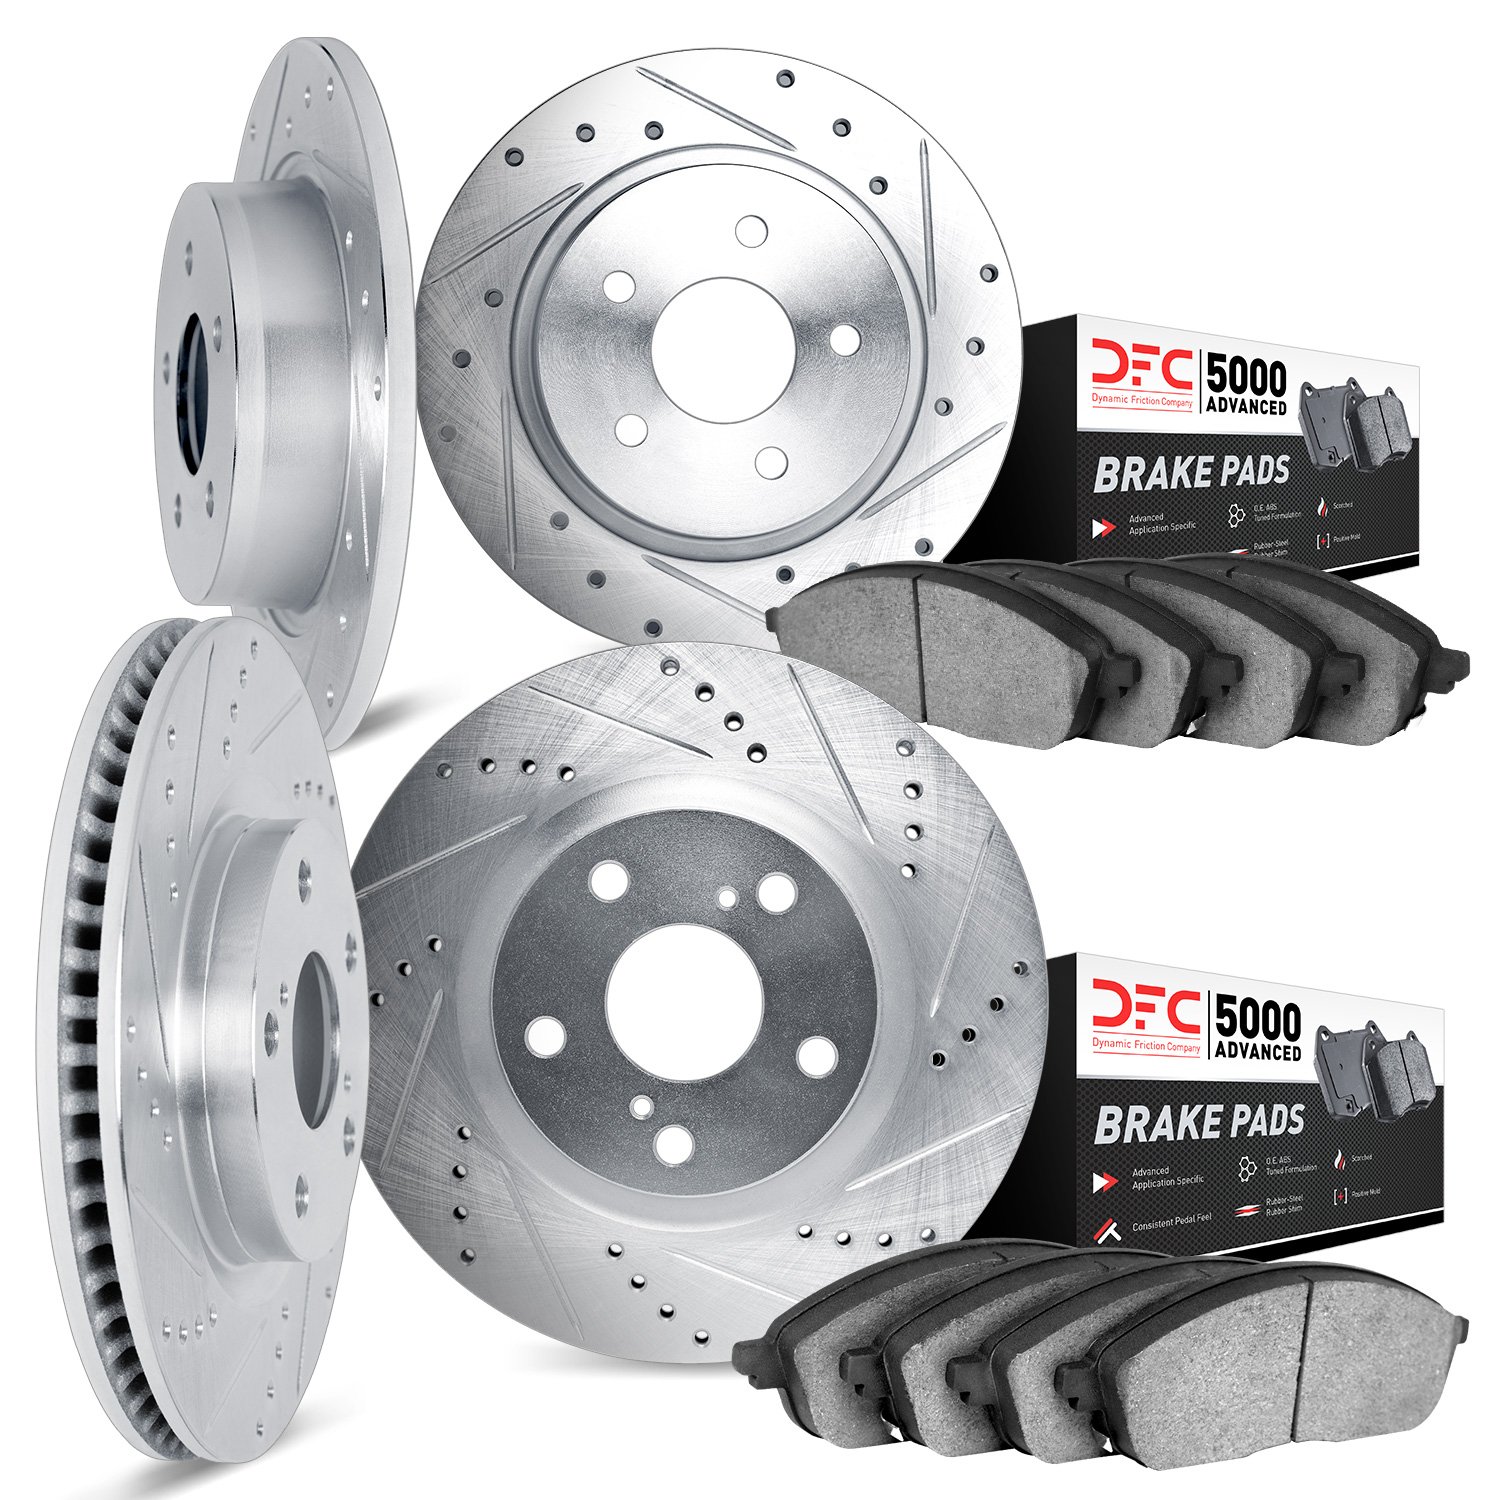 7504-54390 Drilled/Slotted Brake Rotors w/5000 Advanced Brake Pads Kit [Silver], 2015-2019 Ford/Lincoln/Mercury/Mazda, Position: